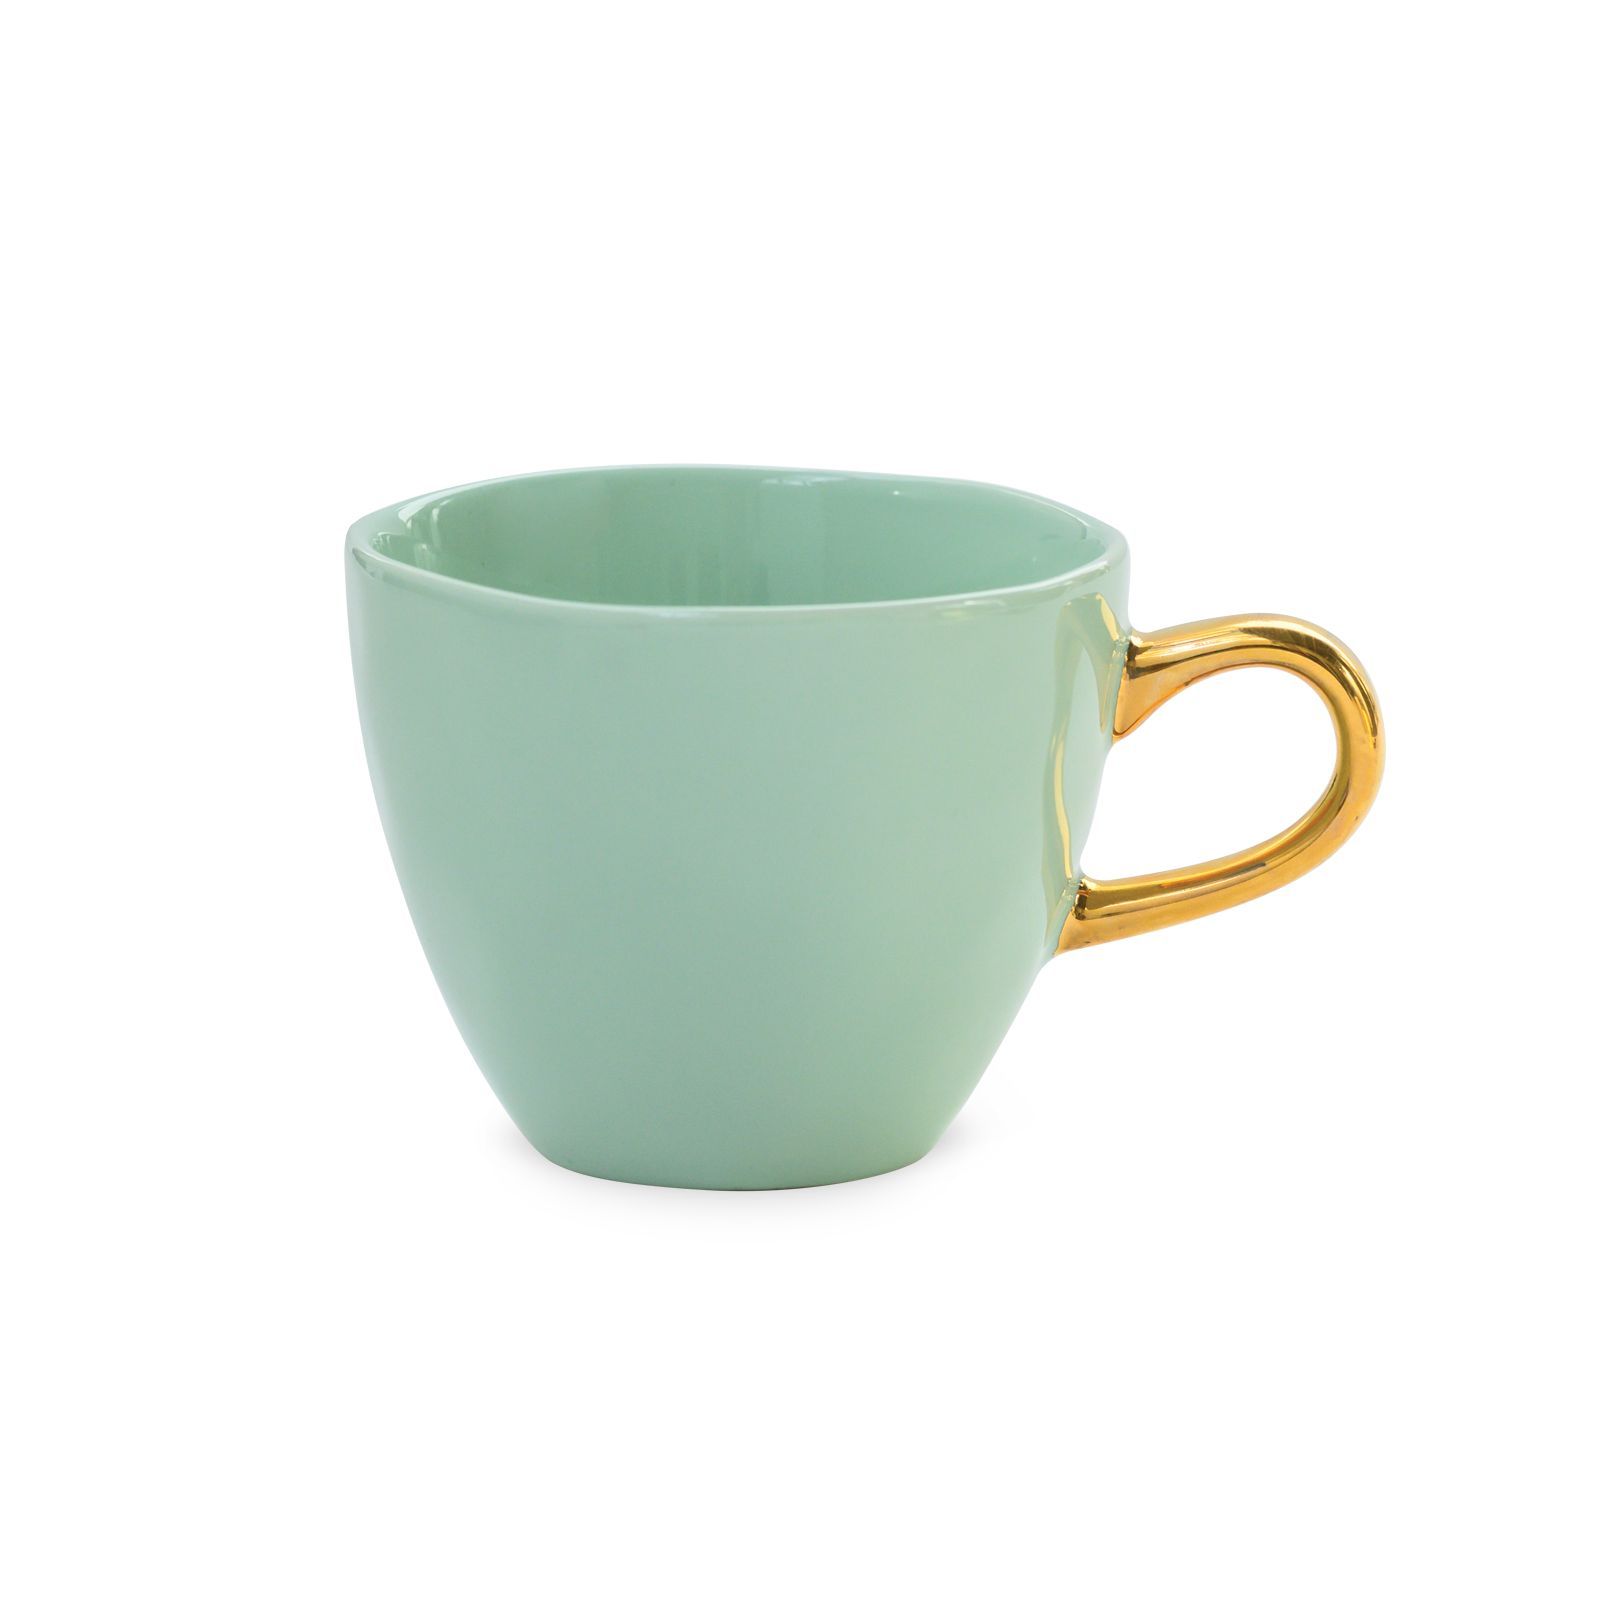 Unc Good Morning Cup Coffee Celadon Gift